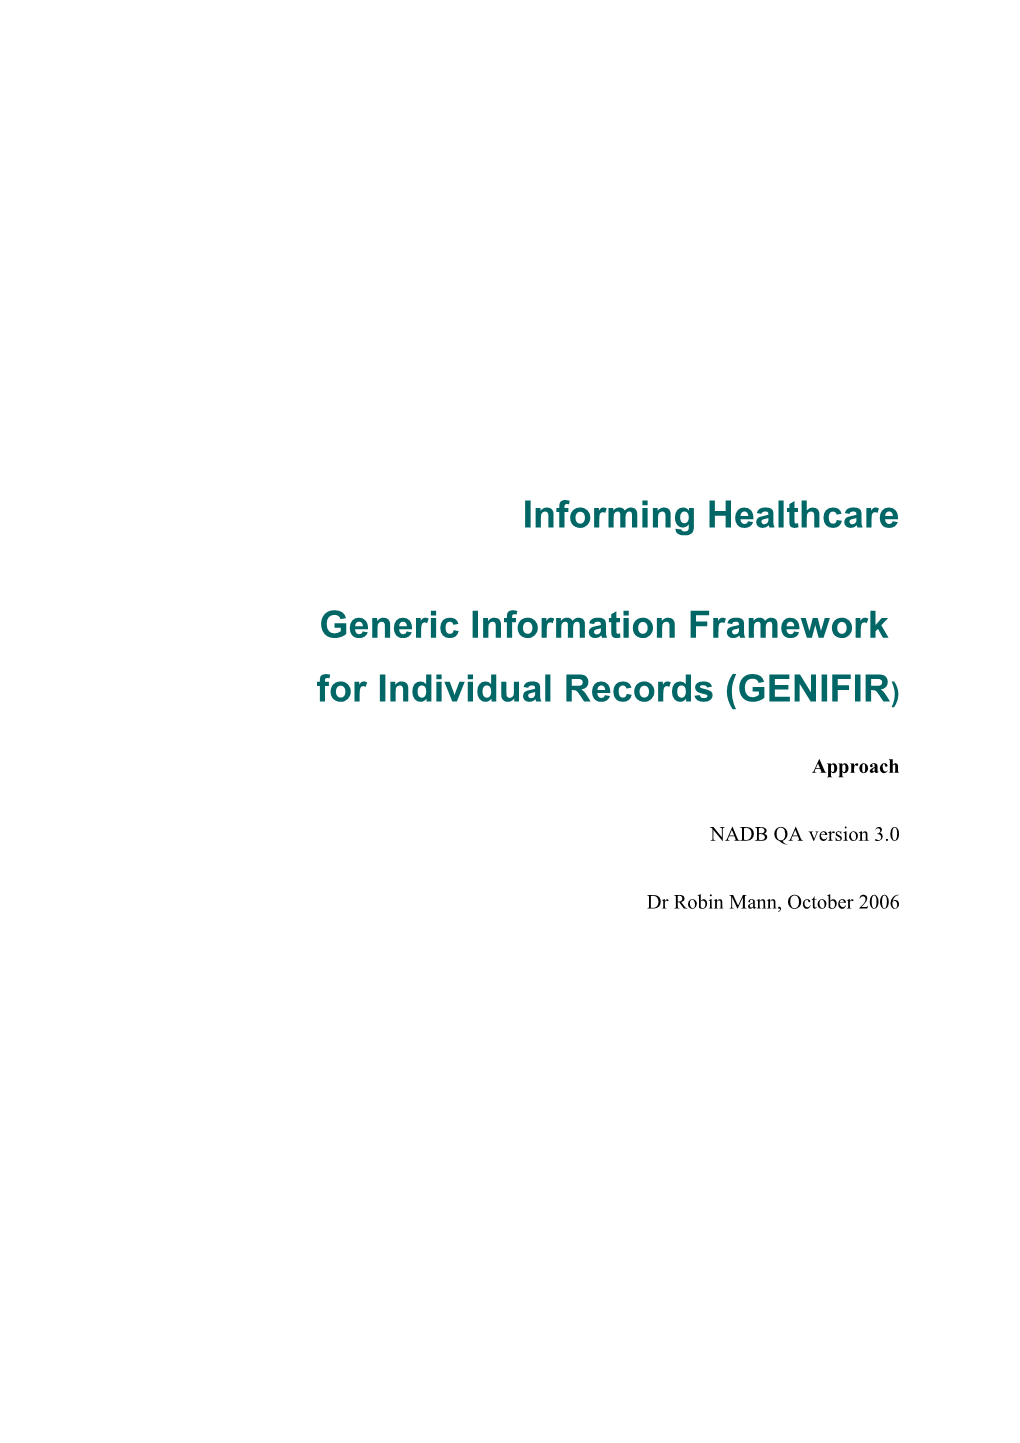 User Requirement for the Individual Health Record